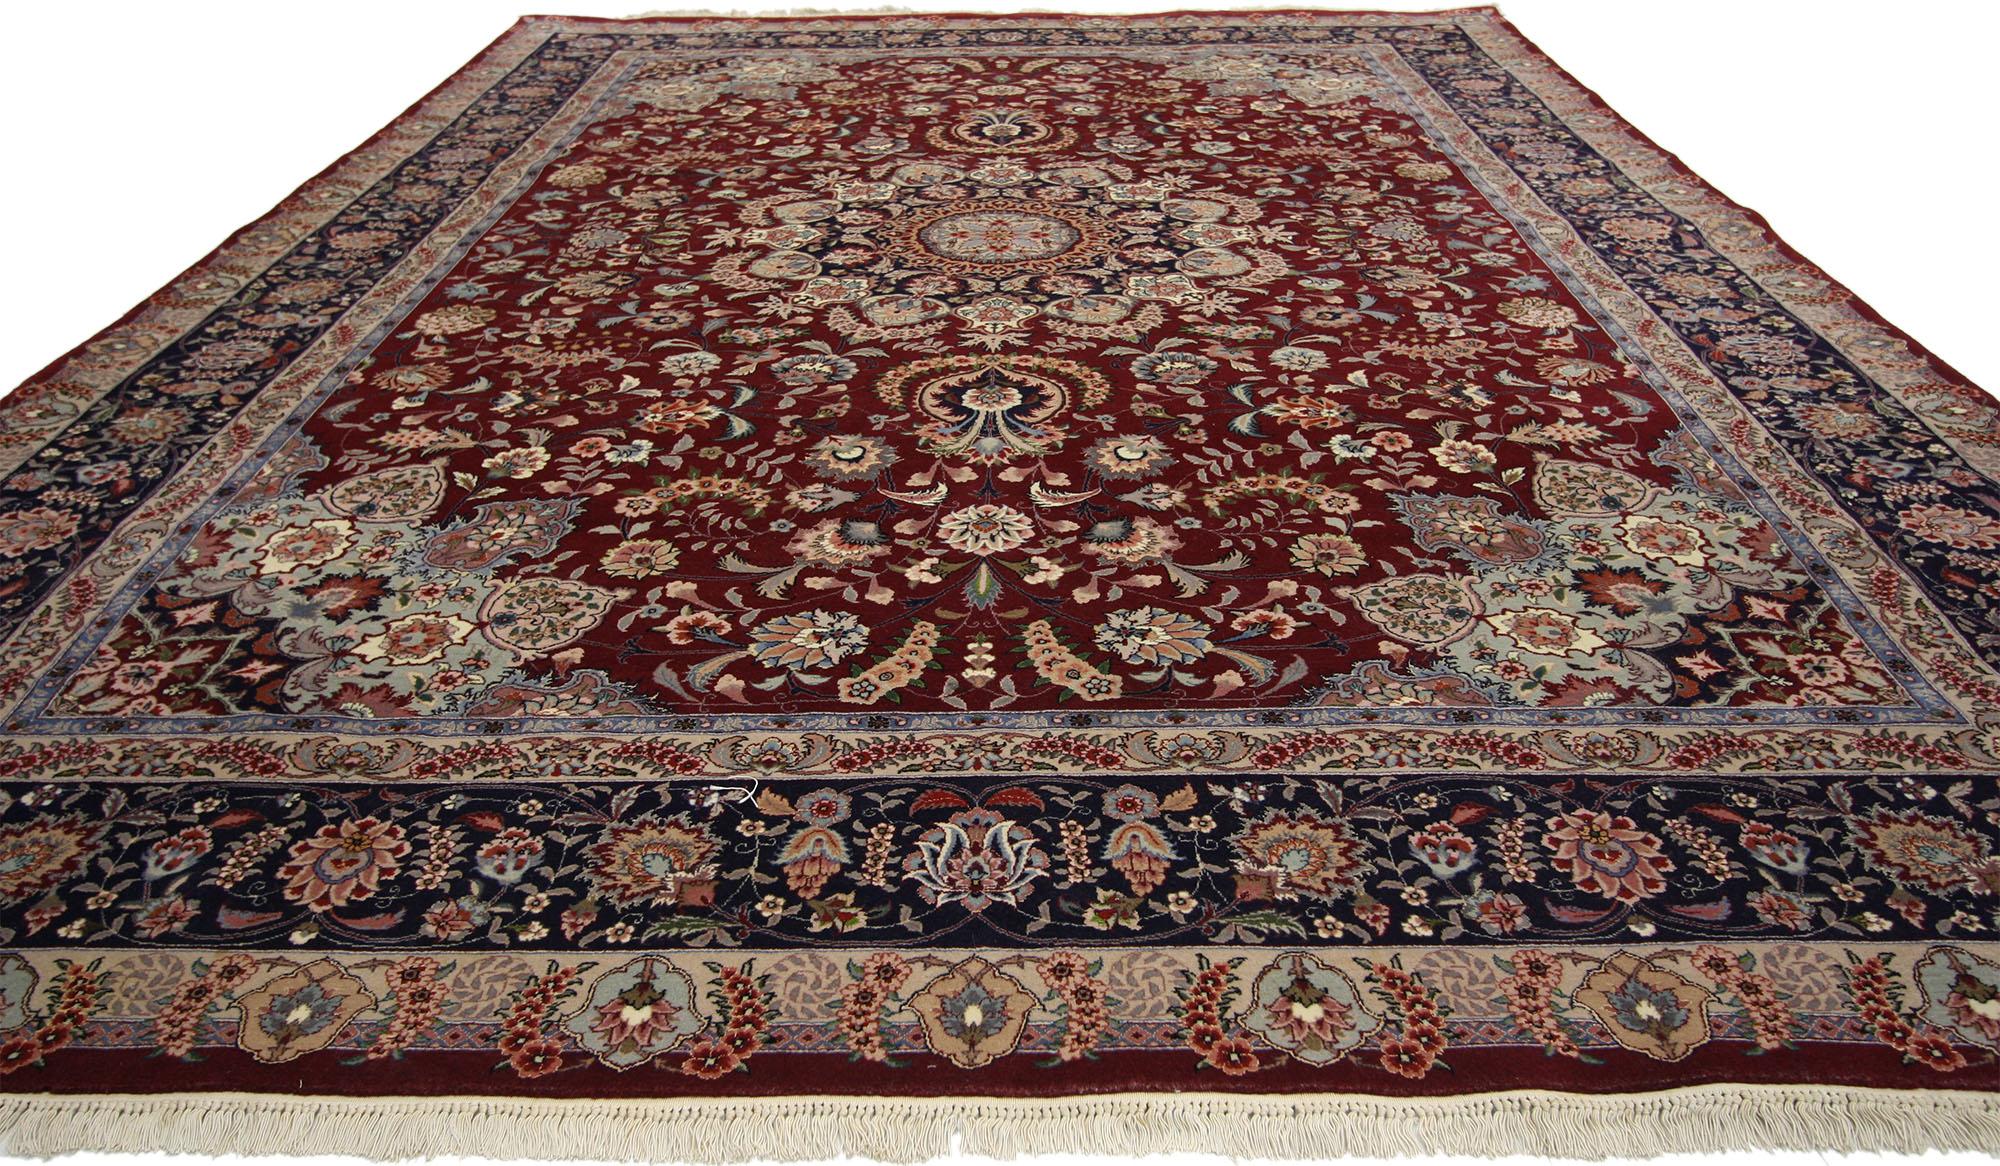 77142 Vintage Persian Style Area Rug with Arabesque Baroque Regency Style. This hand-knotted wool and silk vintage Chinese Persian style Mashhad area rug features an ornate 16-point centre medallion surrounded by an all-over floral pattern and blue